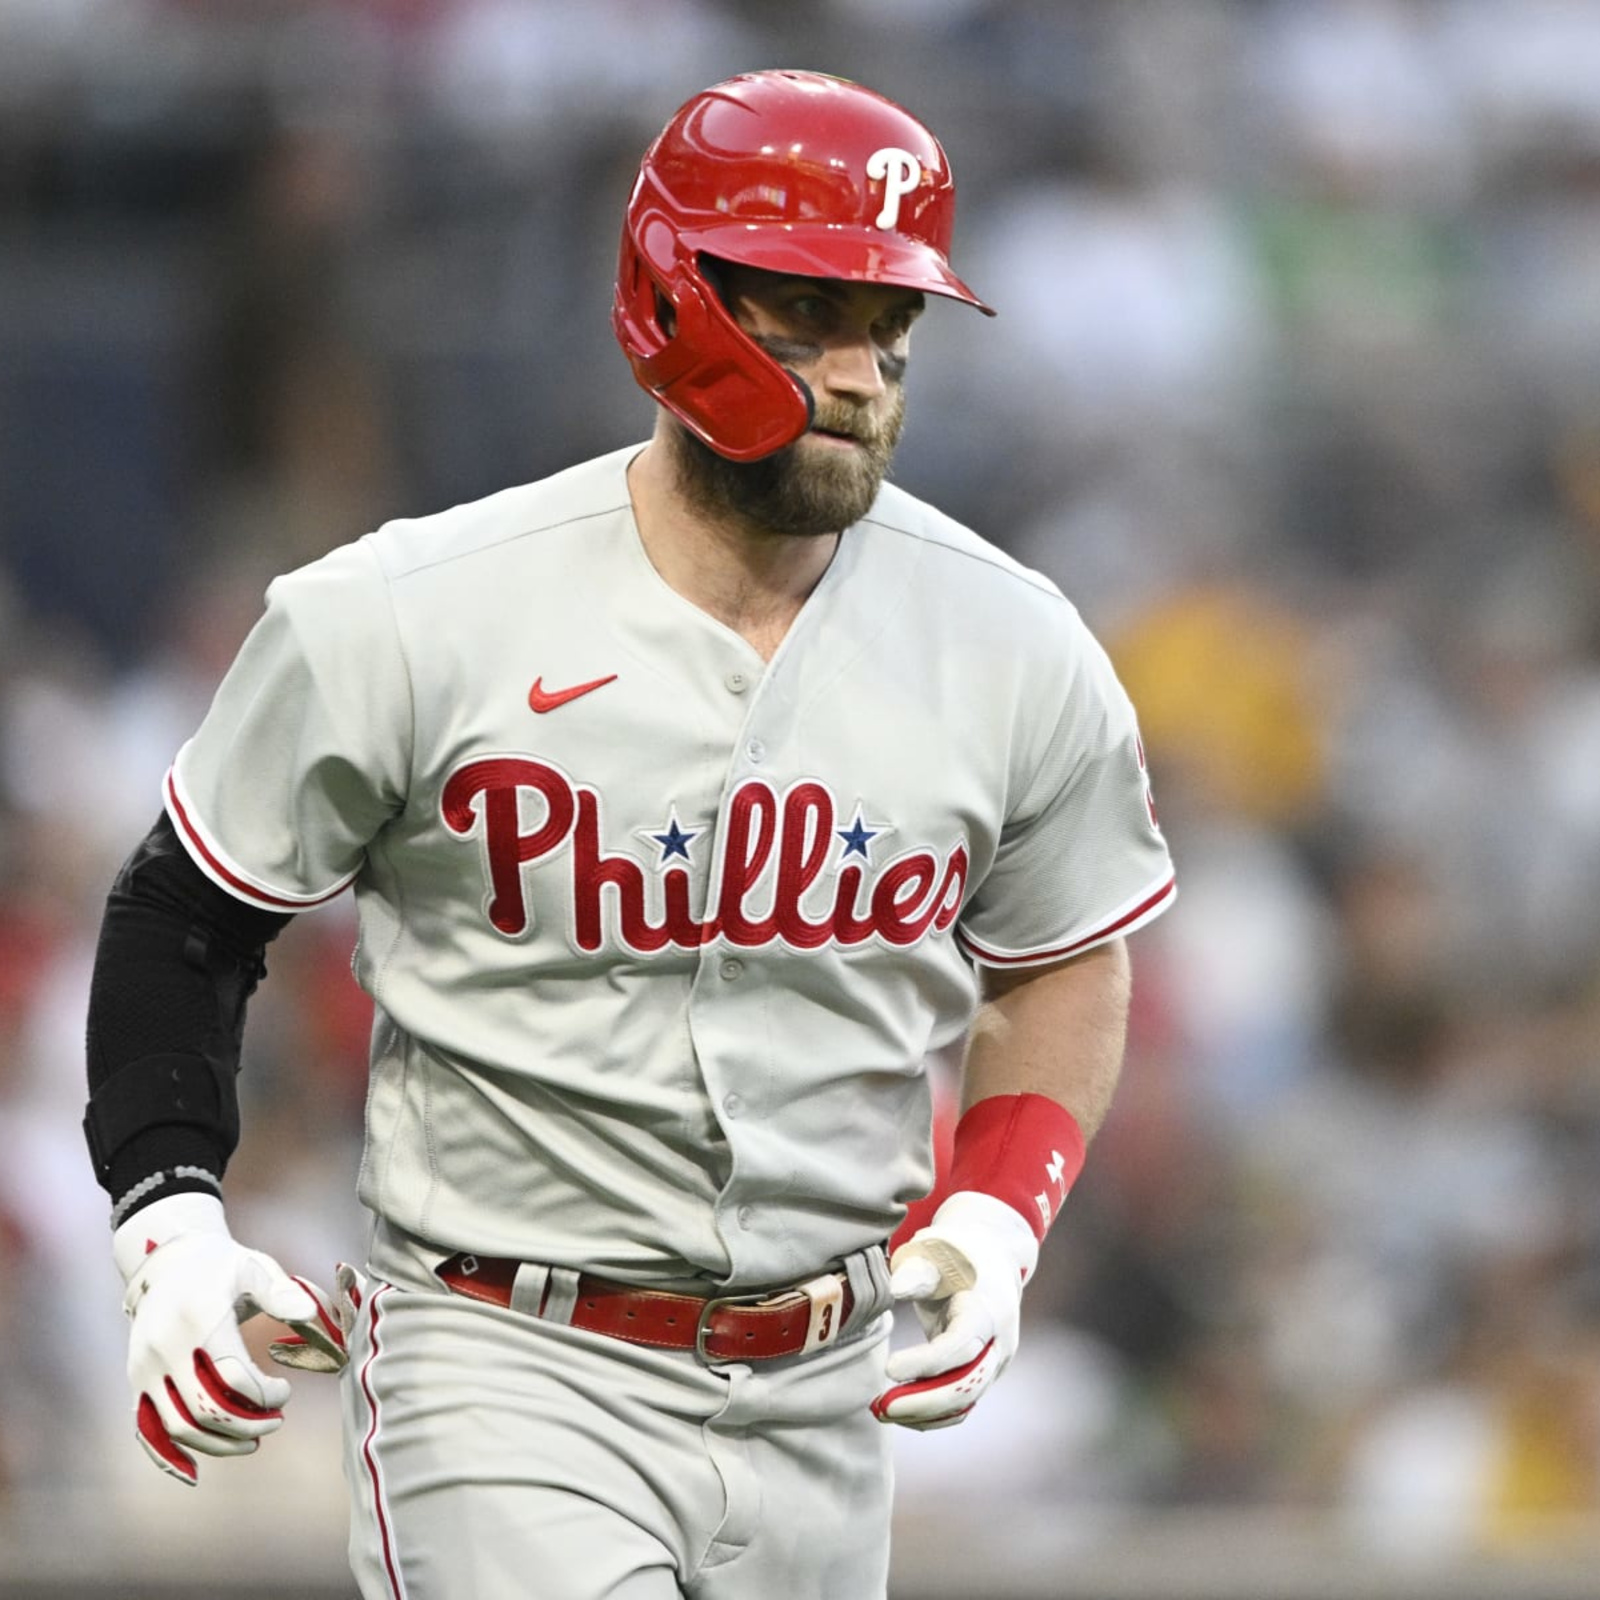 Phillies Bryce Harper begins his rehab assignment with the